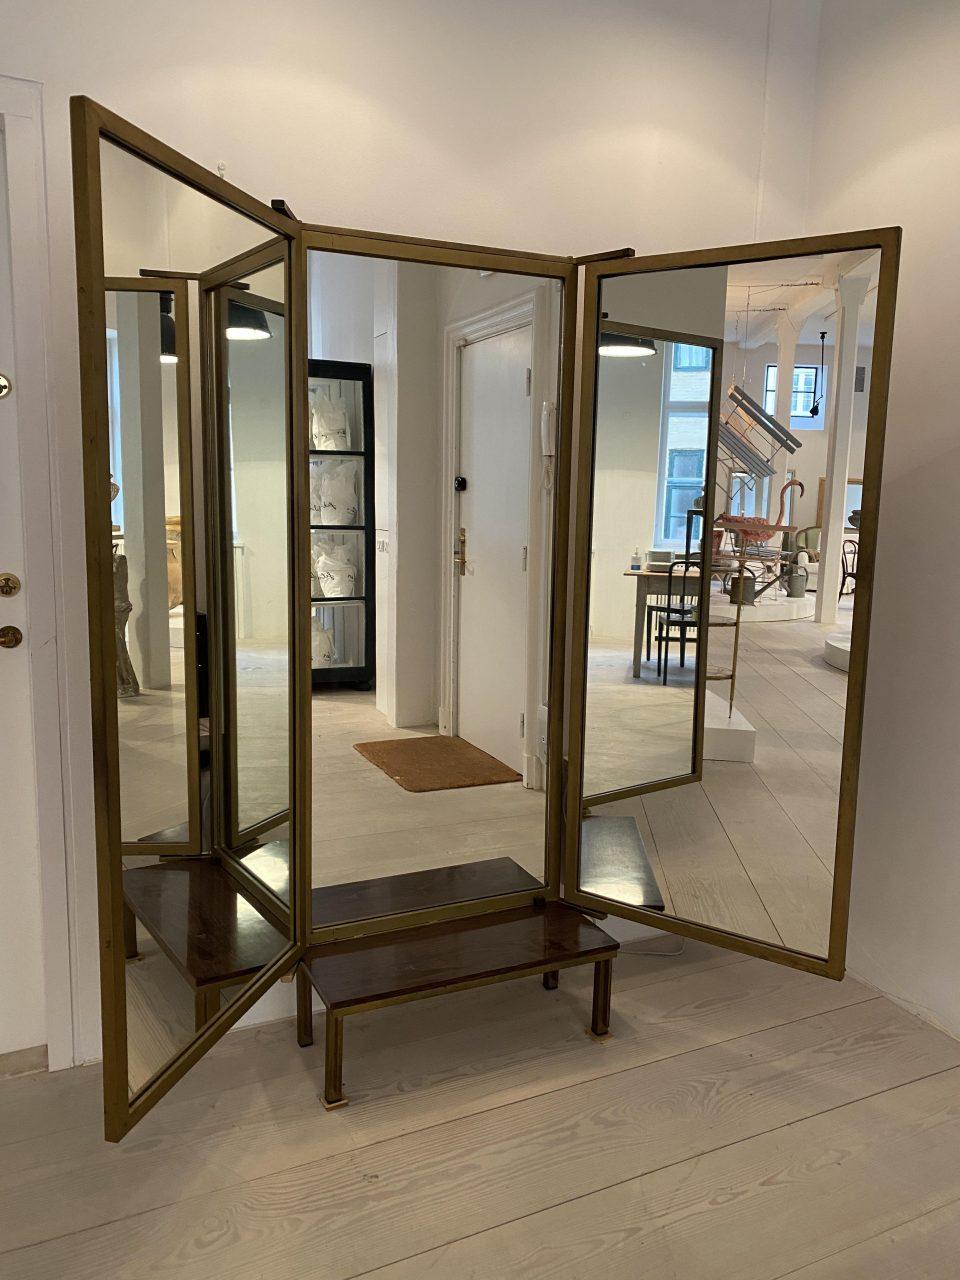 Incredibly handsome and elegant vintage 3-wing dressing mirror from circa 1960s-70s Italy. This gorgeous piece is made of quality metal frames painted with a dark patinated gold finish, that rests on a sleekly designed base including a practical